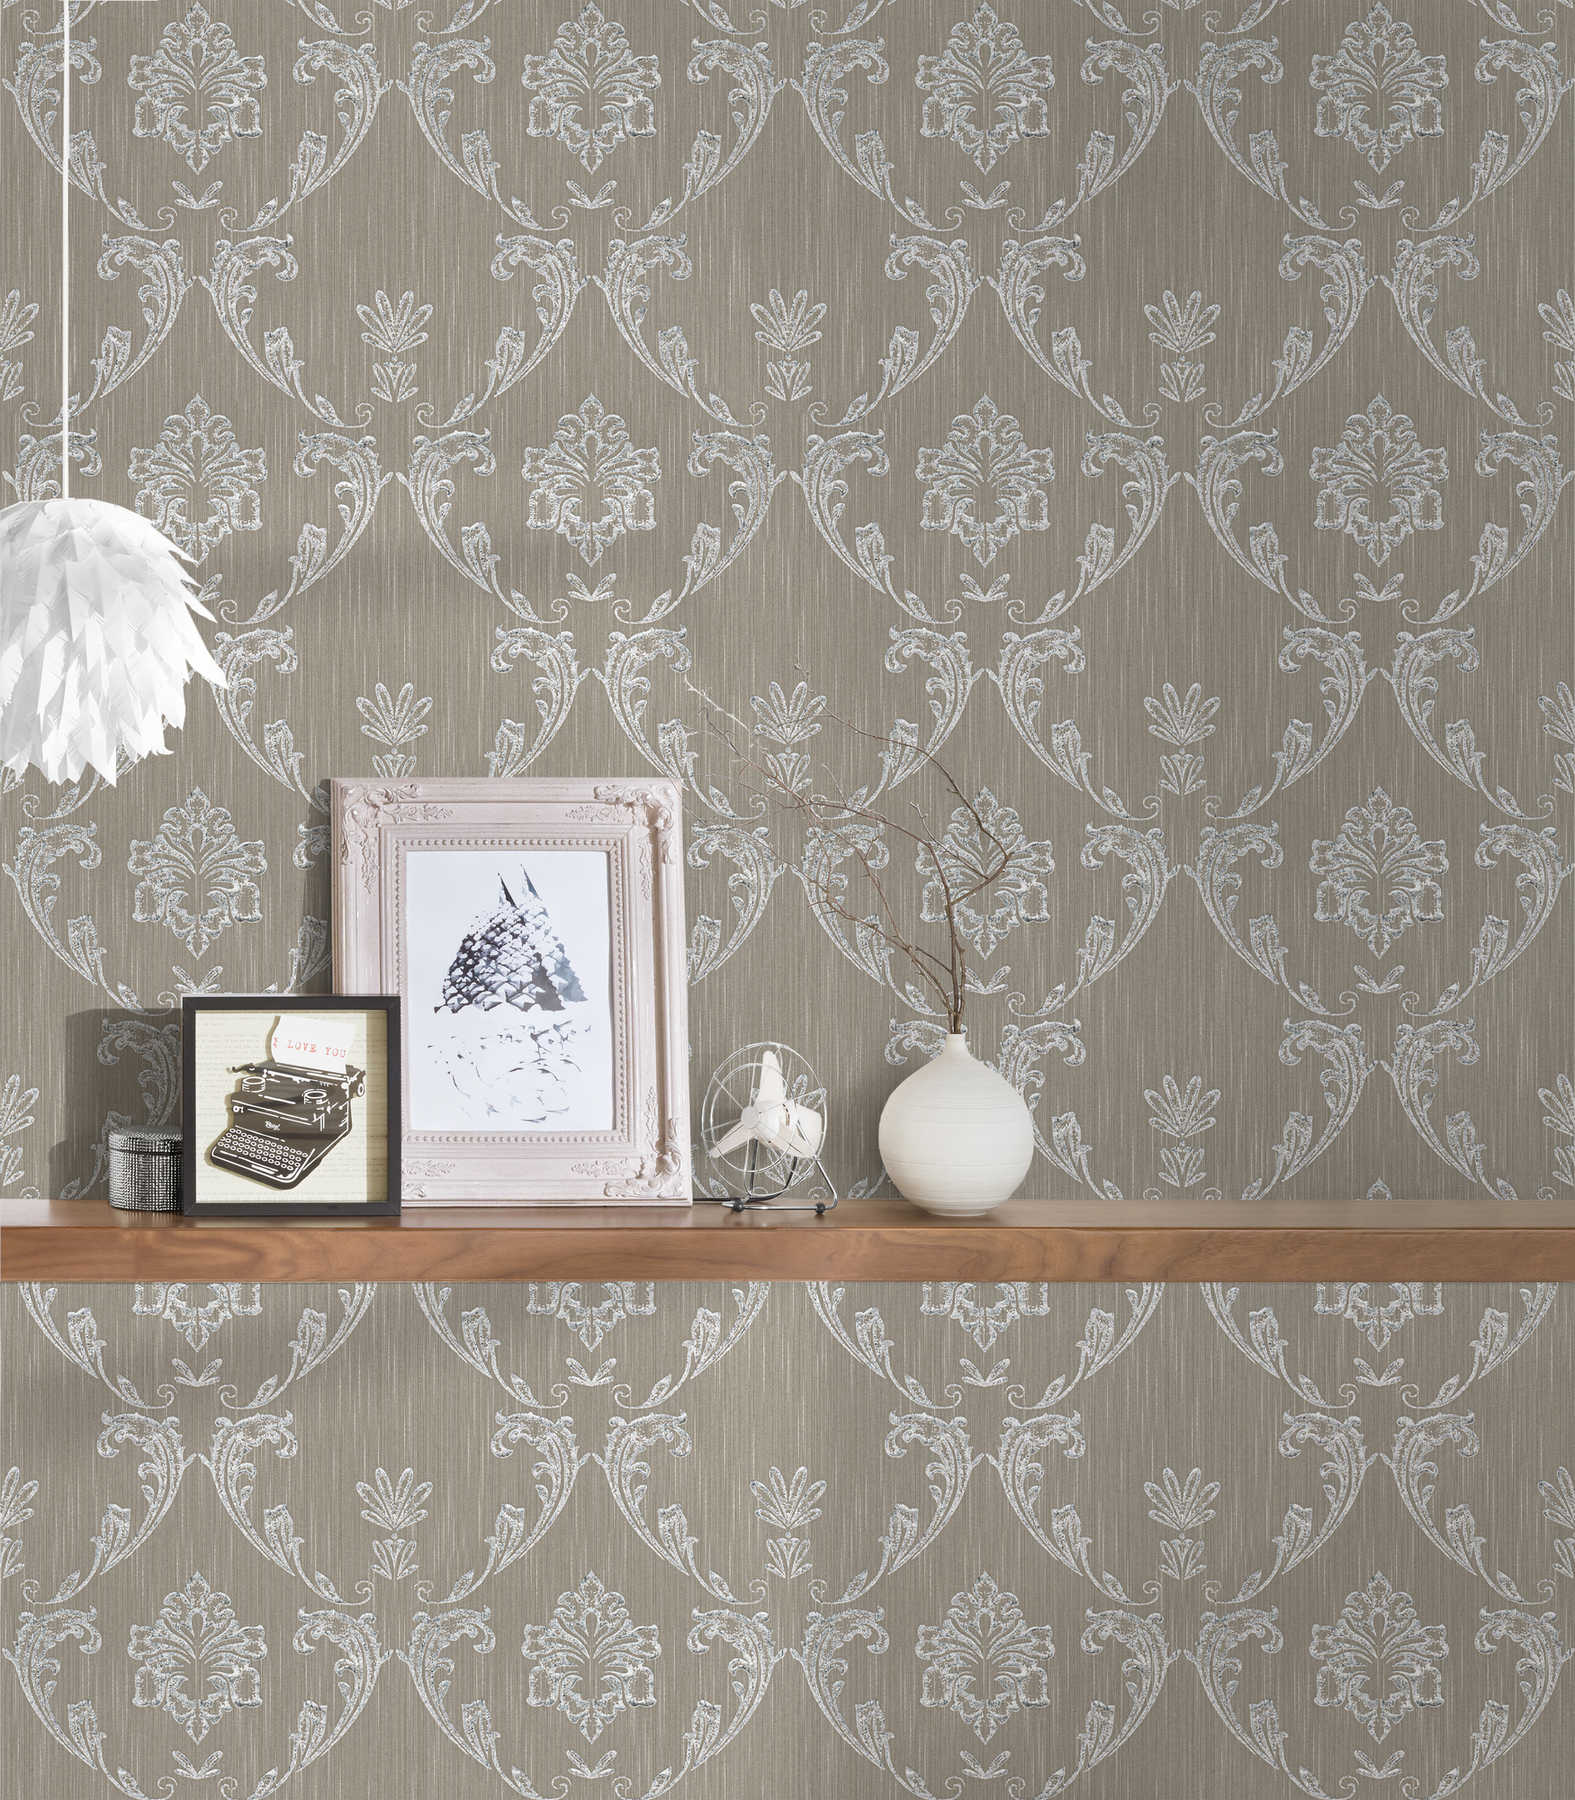             Ornamental wallpaper with floral elements in silver - silver, brown
        